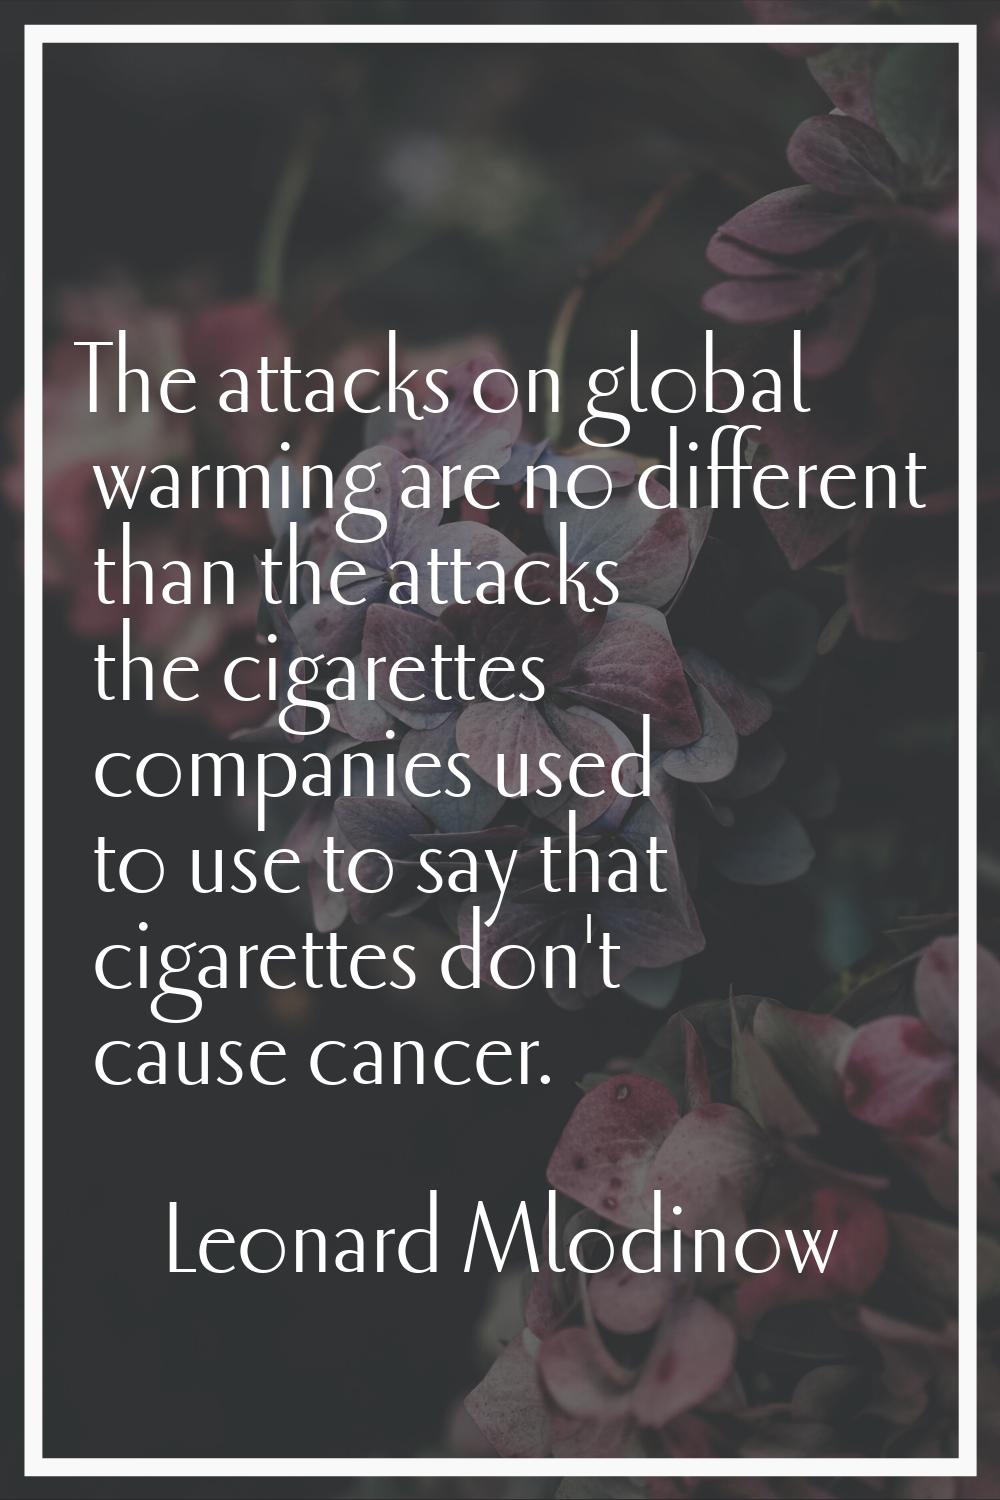 The attacks on global warming are no different than the attacks the cigarettes companies used to us